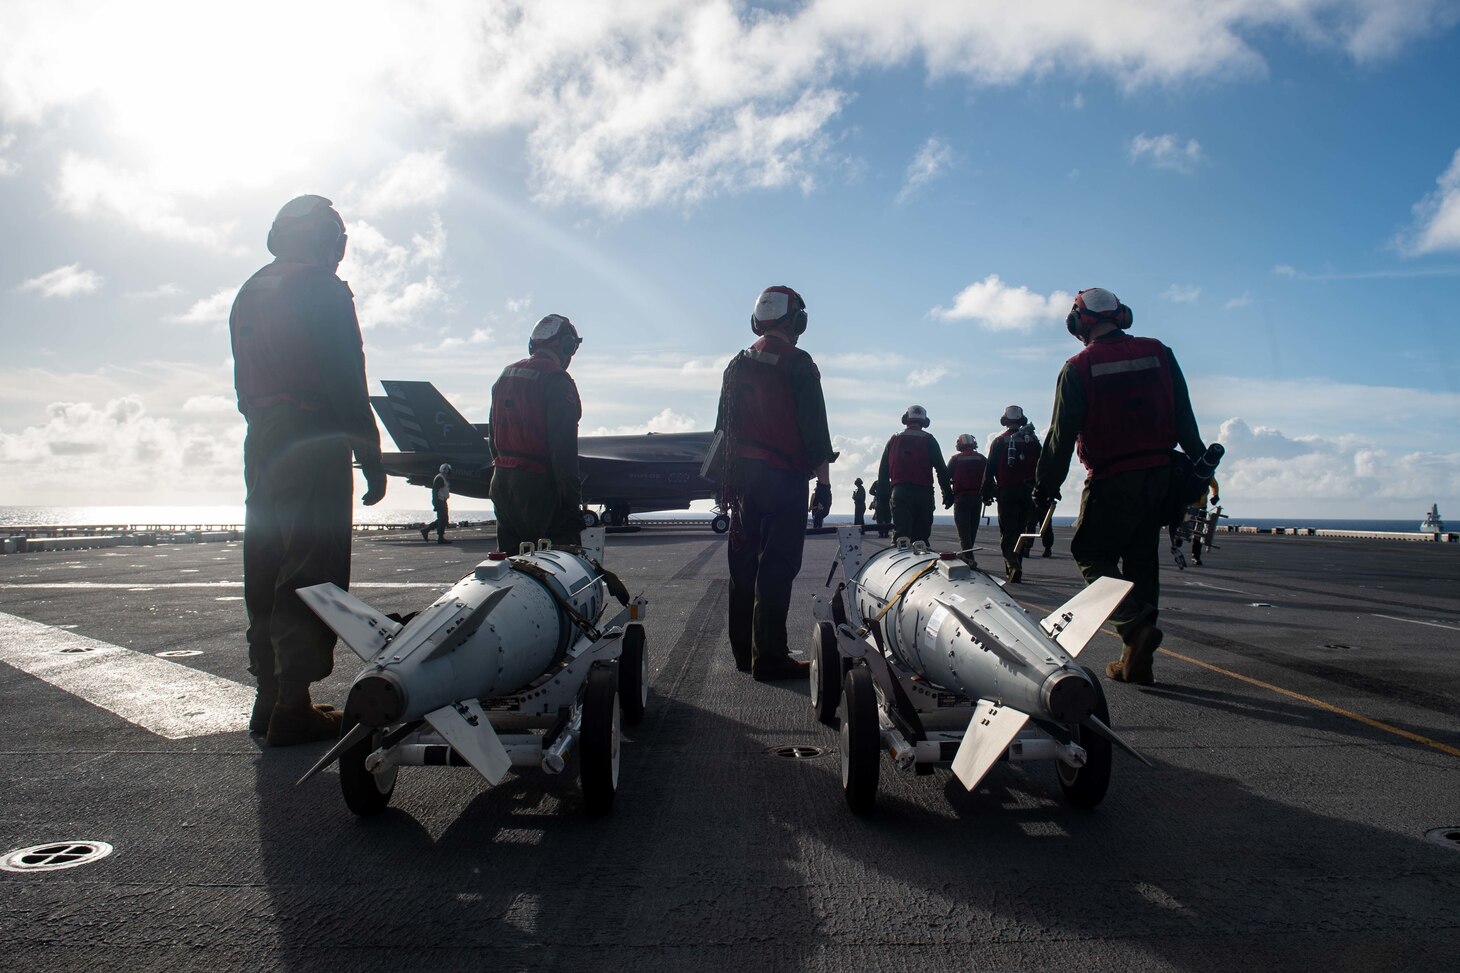 PHILIPPINE SEA (Aug. 20, 2021) Marines from the 31st Marine Expeditionary Unit (MEU) prepare to load inert ordnance into F-35B Lightning II fighter aircraft from Marine Fighter Attack Squadron (VMFA) 211, embarked on the Royal Navy aircraft carrier HMS Queen Elizabeth (R08), during flight operations between the forward-deployed amphibious assault ship USS America (LHA 6) and the Royal Navy. America, flagship of the America Expeditionary Strike Group, along with the 31st MEU, is operating in the U.S. 7th Fleet area of responsibility to enhance interoperability with allies and partners and serve as a ready response force to defend peace and stability in the Indo-Pacific region. (U.S. Navy photo by Mass Communication Specialist 3rd Class Matthew Cavenaile)